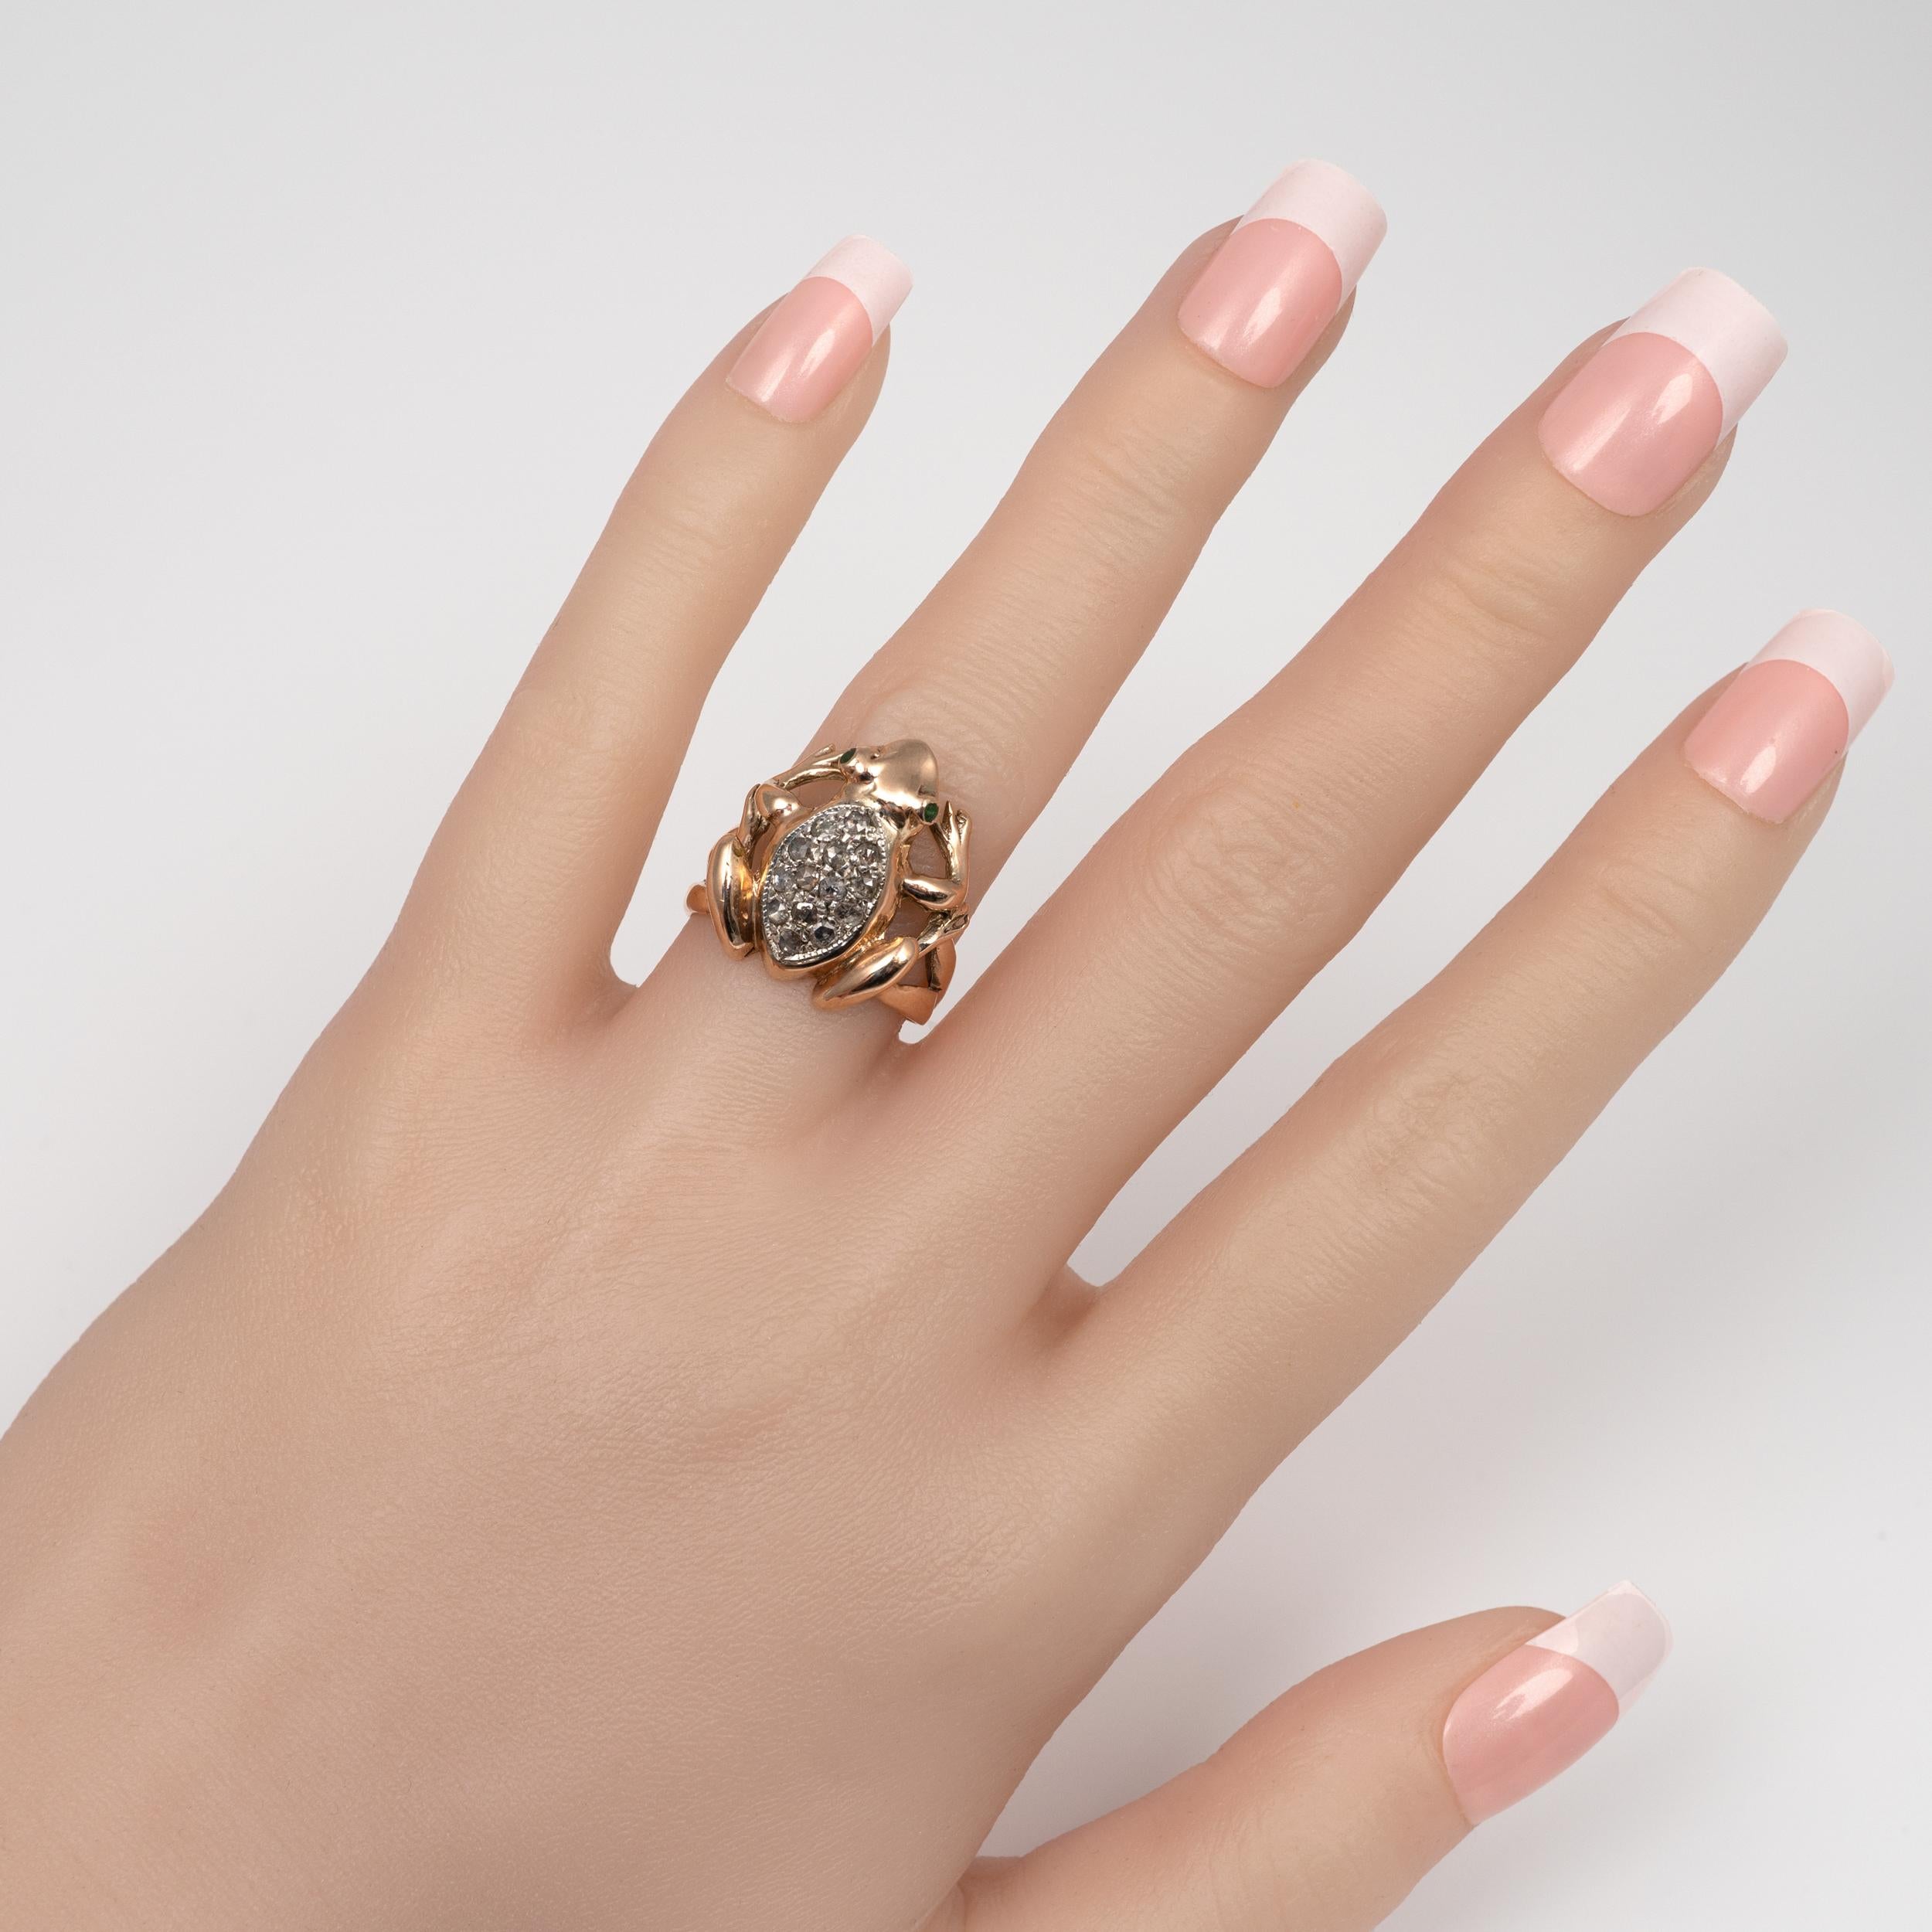 A very cute rose gold Frog ring set with old cut diamonds and emeralds. Circa 1970s
The chunky frog is nicely modeled in a realistic fashion. It features a white gold marquis shape setting that is bejeweled with 14 paved set rose cut diamonds and